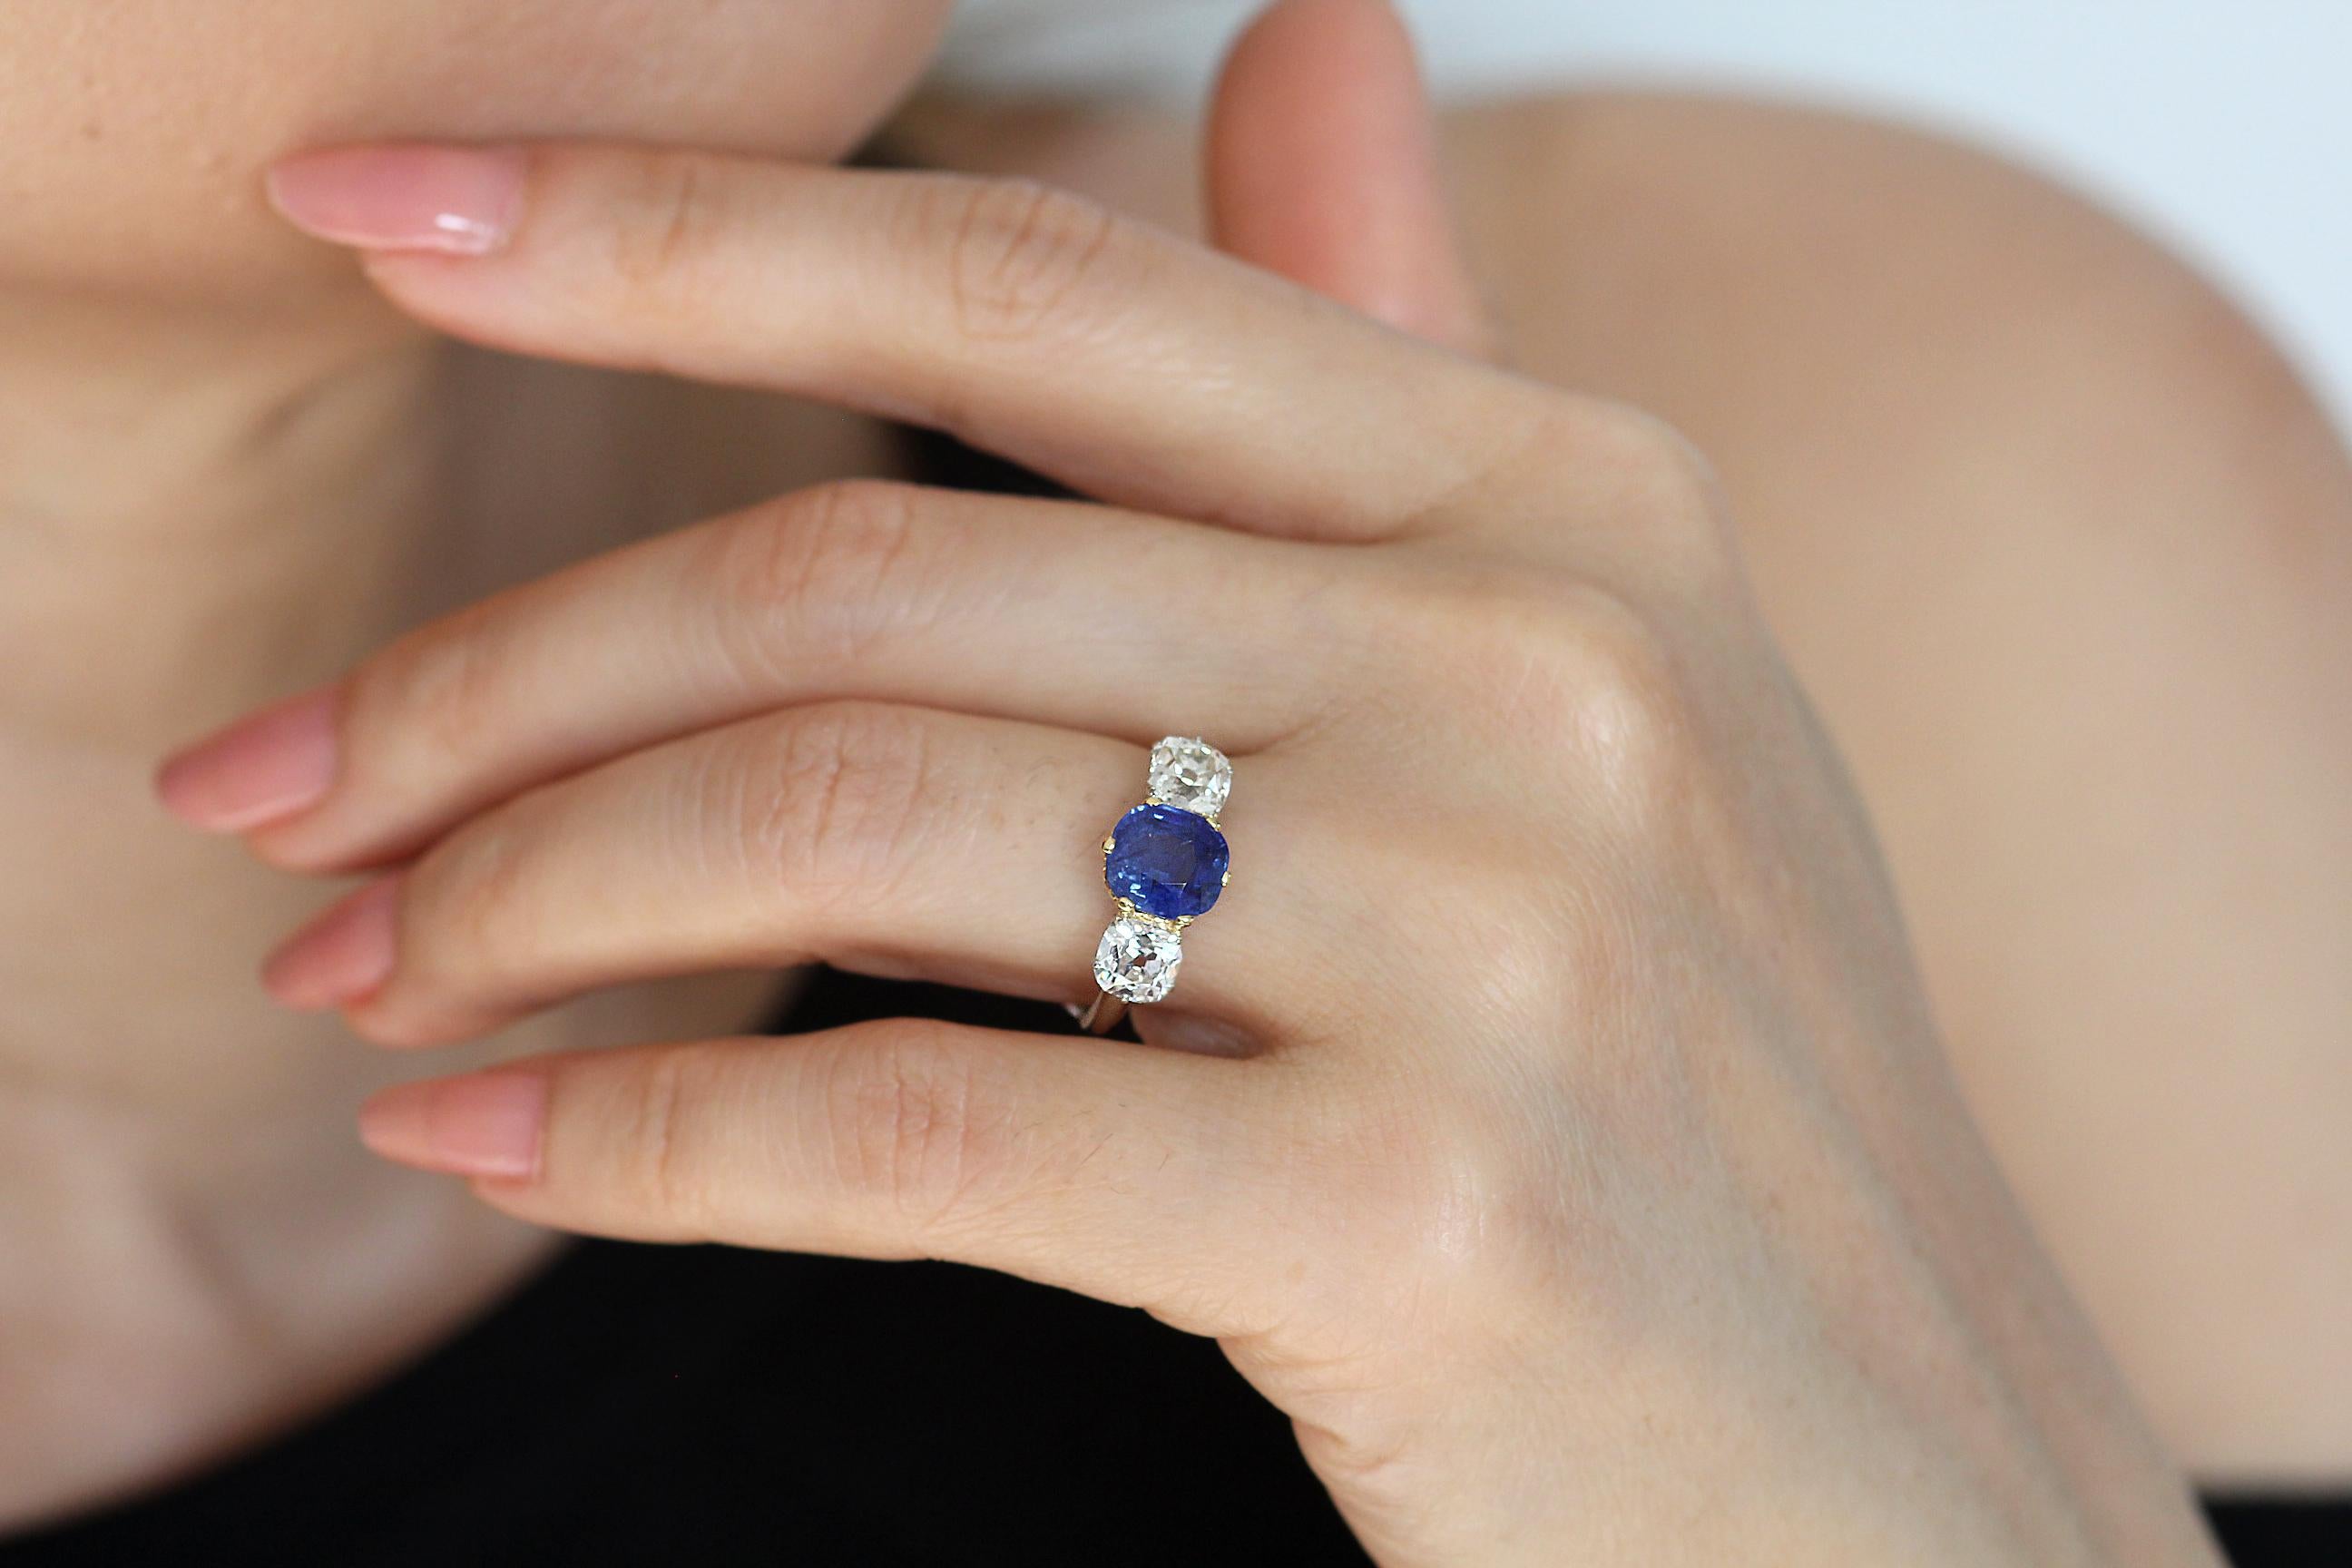 Kashmir Sapphire and Diamond three sone ring in 18 K white and yellow gold.

1 x Antique Cushion Cut Sapphire, Medium Strong Saturation Colour, Weight 2.291 Carats, SSEF Certificate, Natural Sapphire no indication of heating, Origin - Kashmir
There